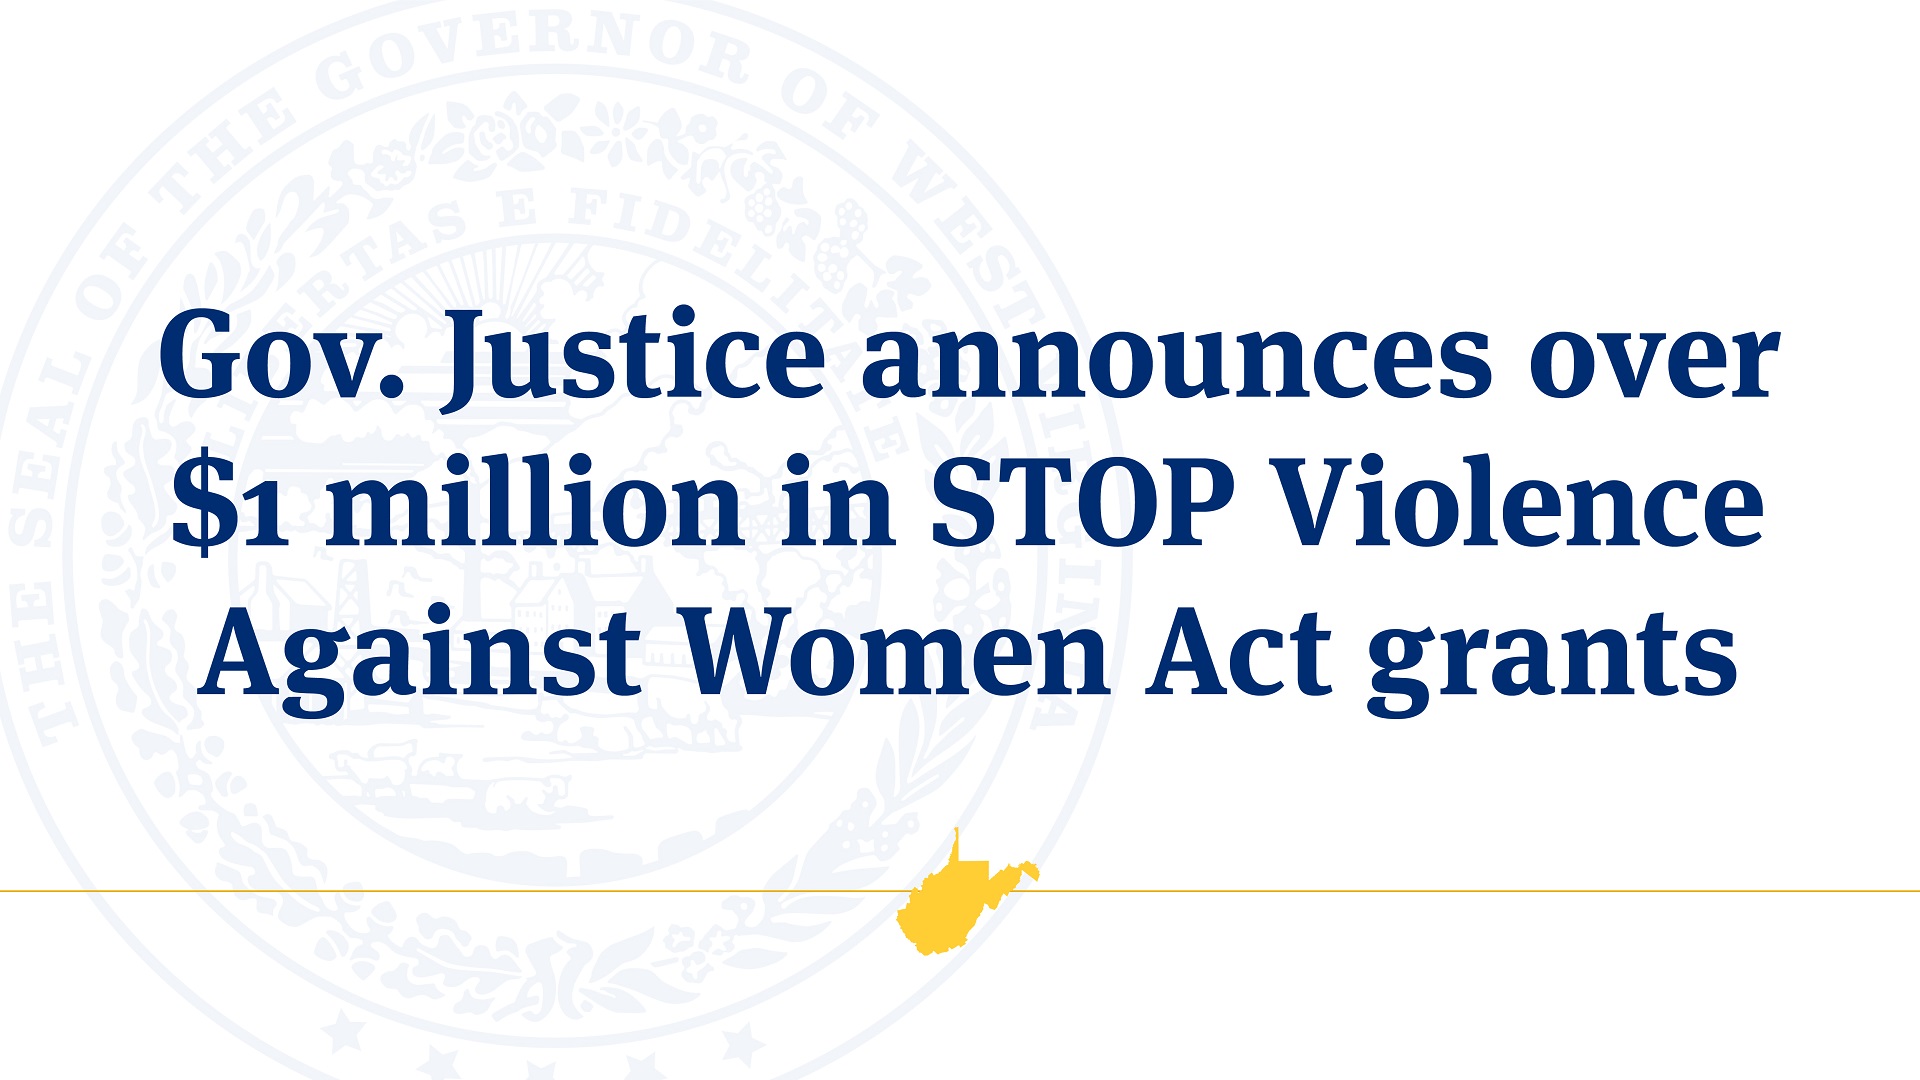 Gov. Justice announces over 1 million in STOP Violence Against Women